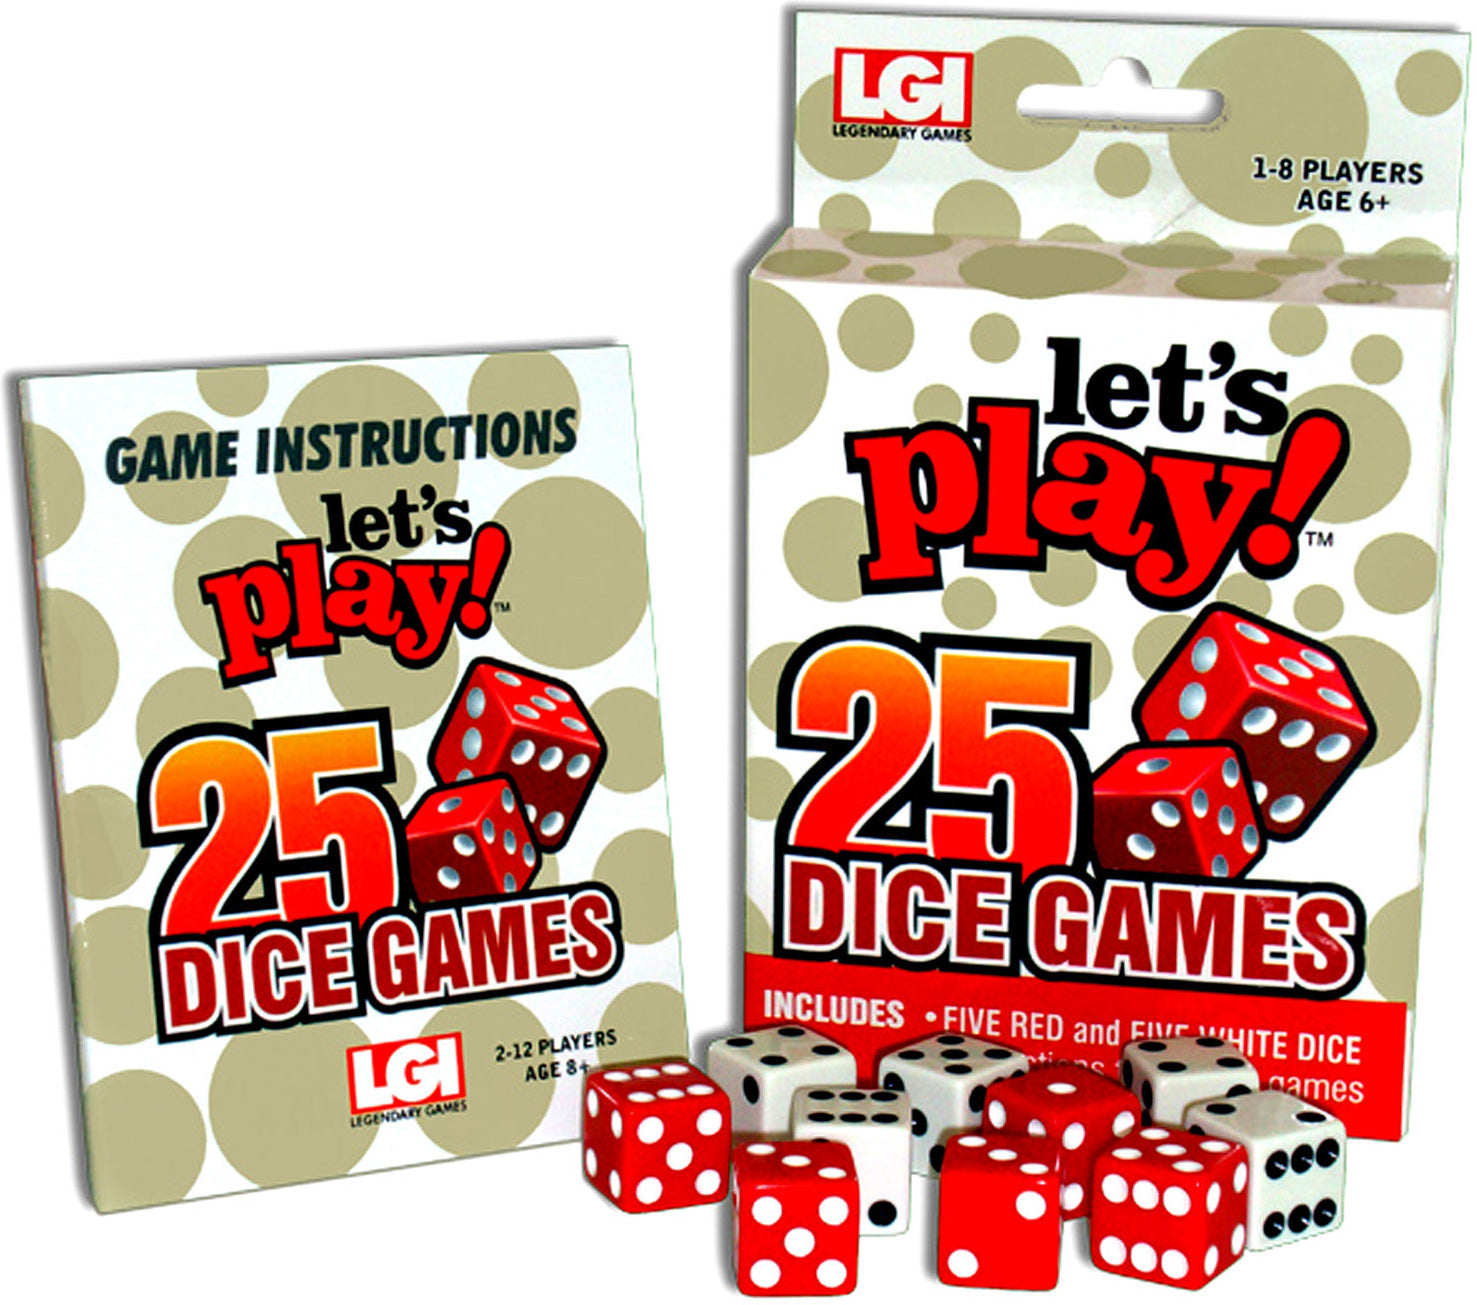 Let's Play! 25 Dice Games